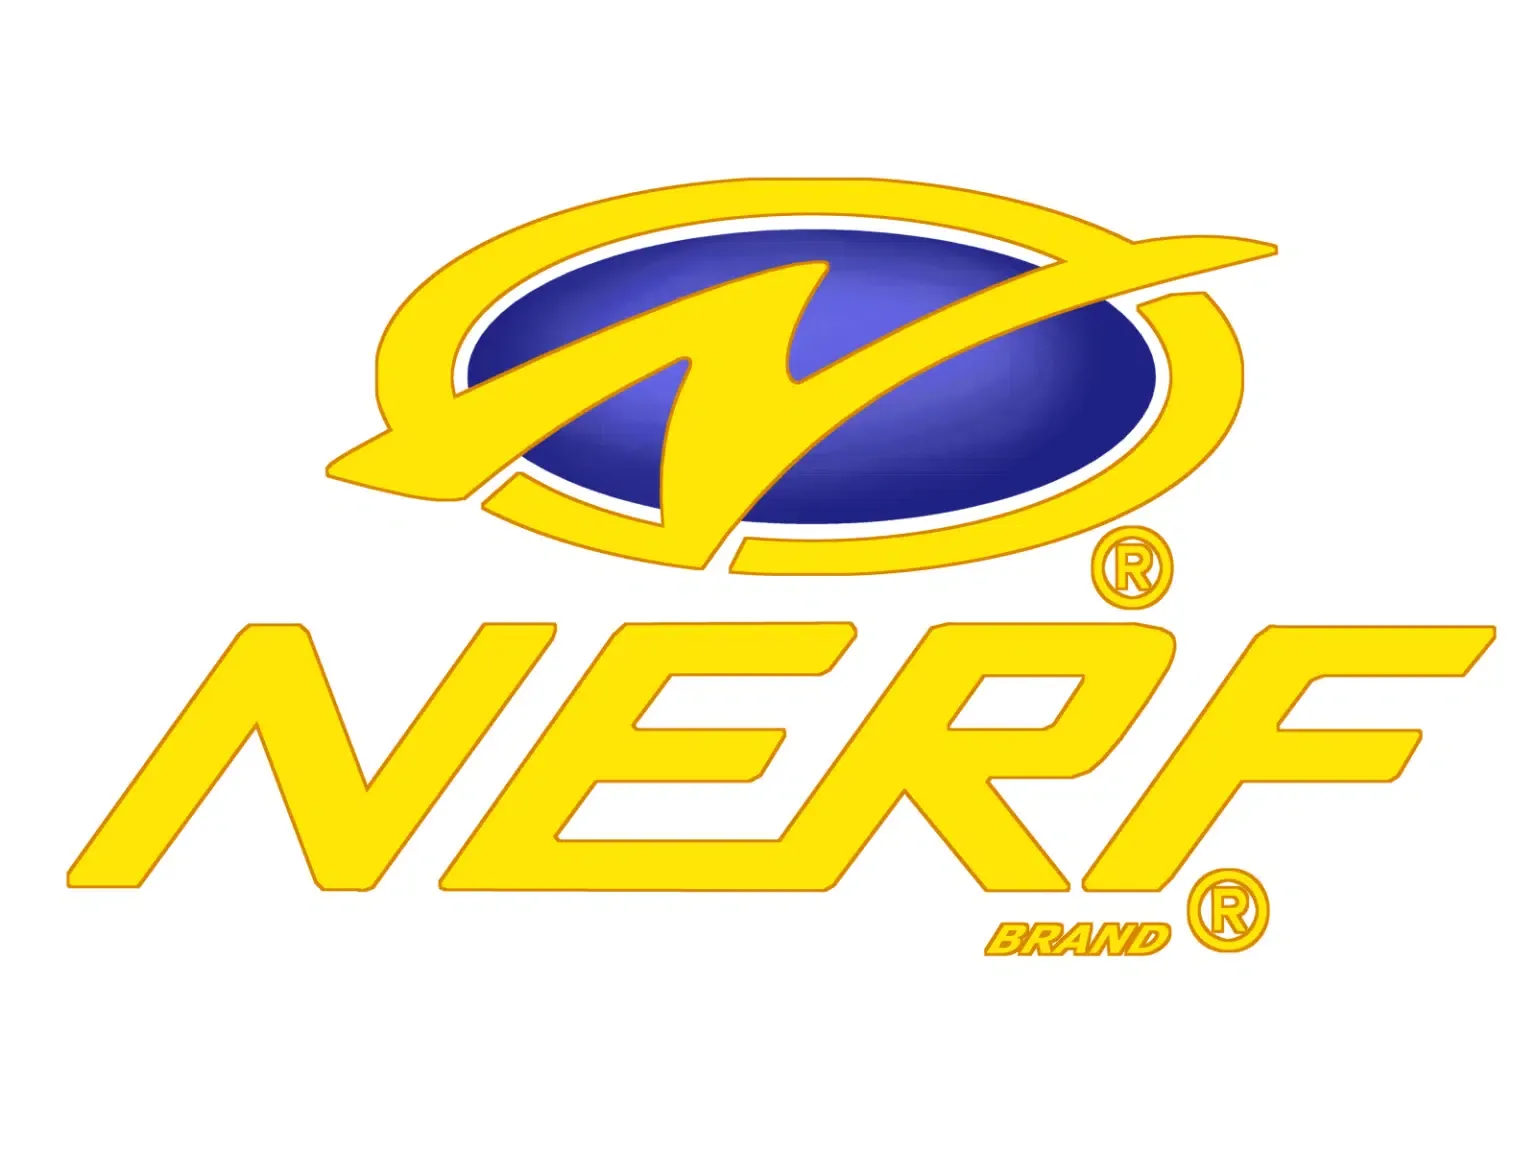 1998-2003: The Fourth Version Of The Nerf Logo